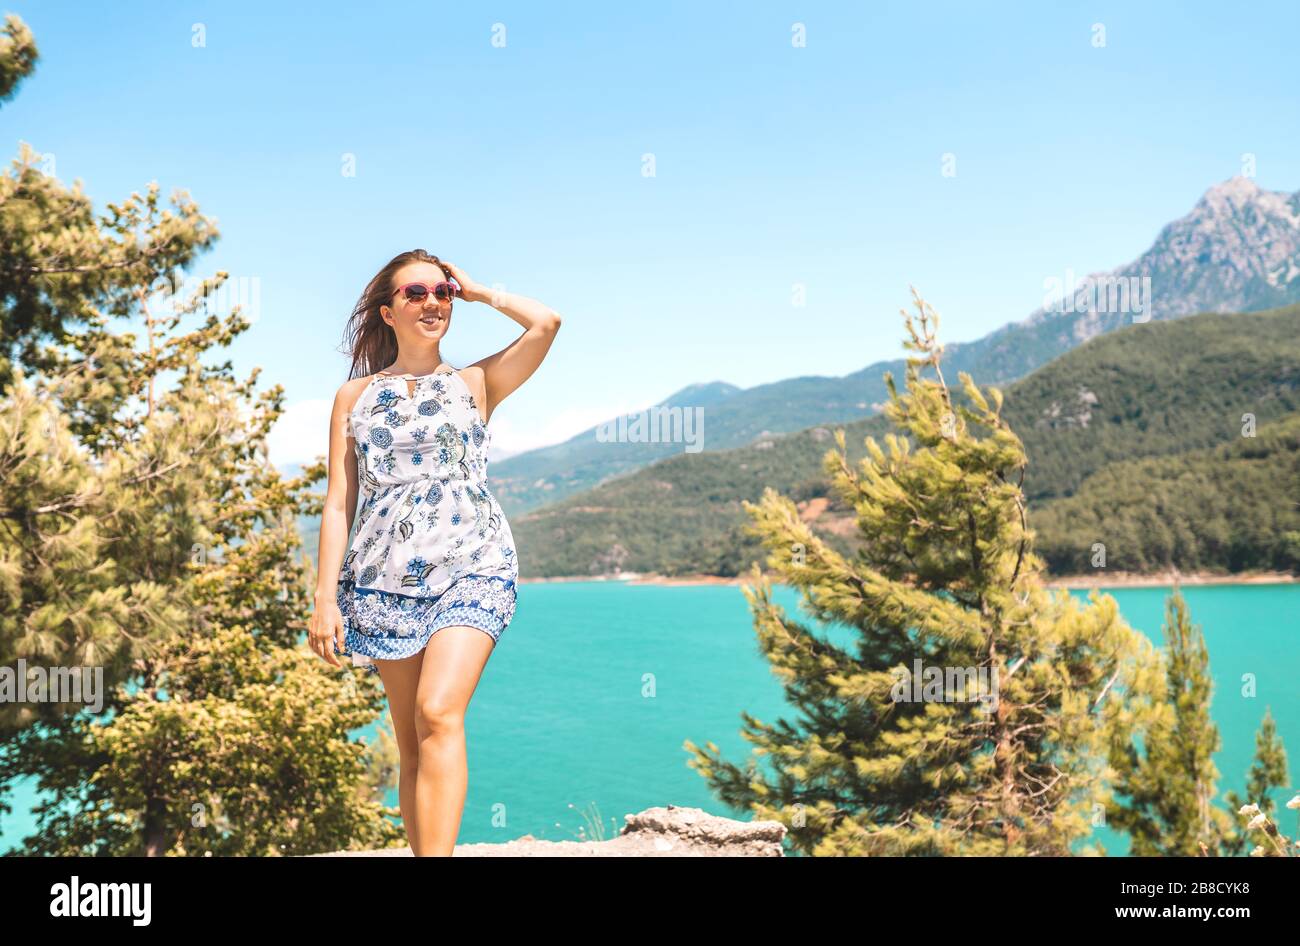 Woman walking in nature, mountain in the background. Adventure, freedom and carefree lifestyle. Millennial lady in summer dress. Landscape with valley. Stock Photo